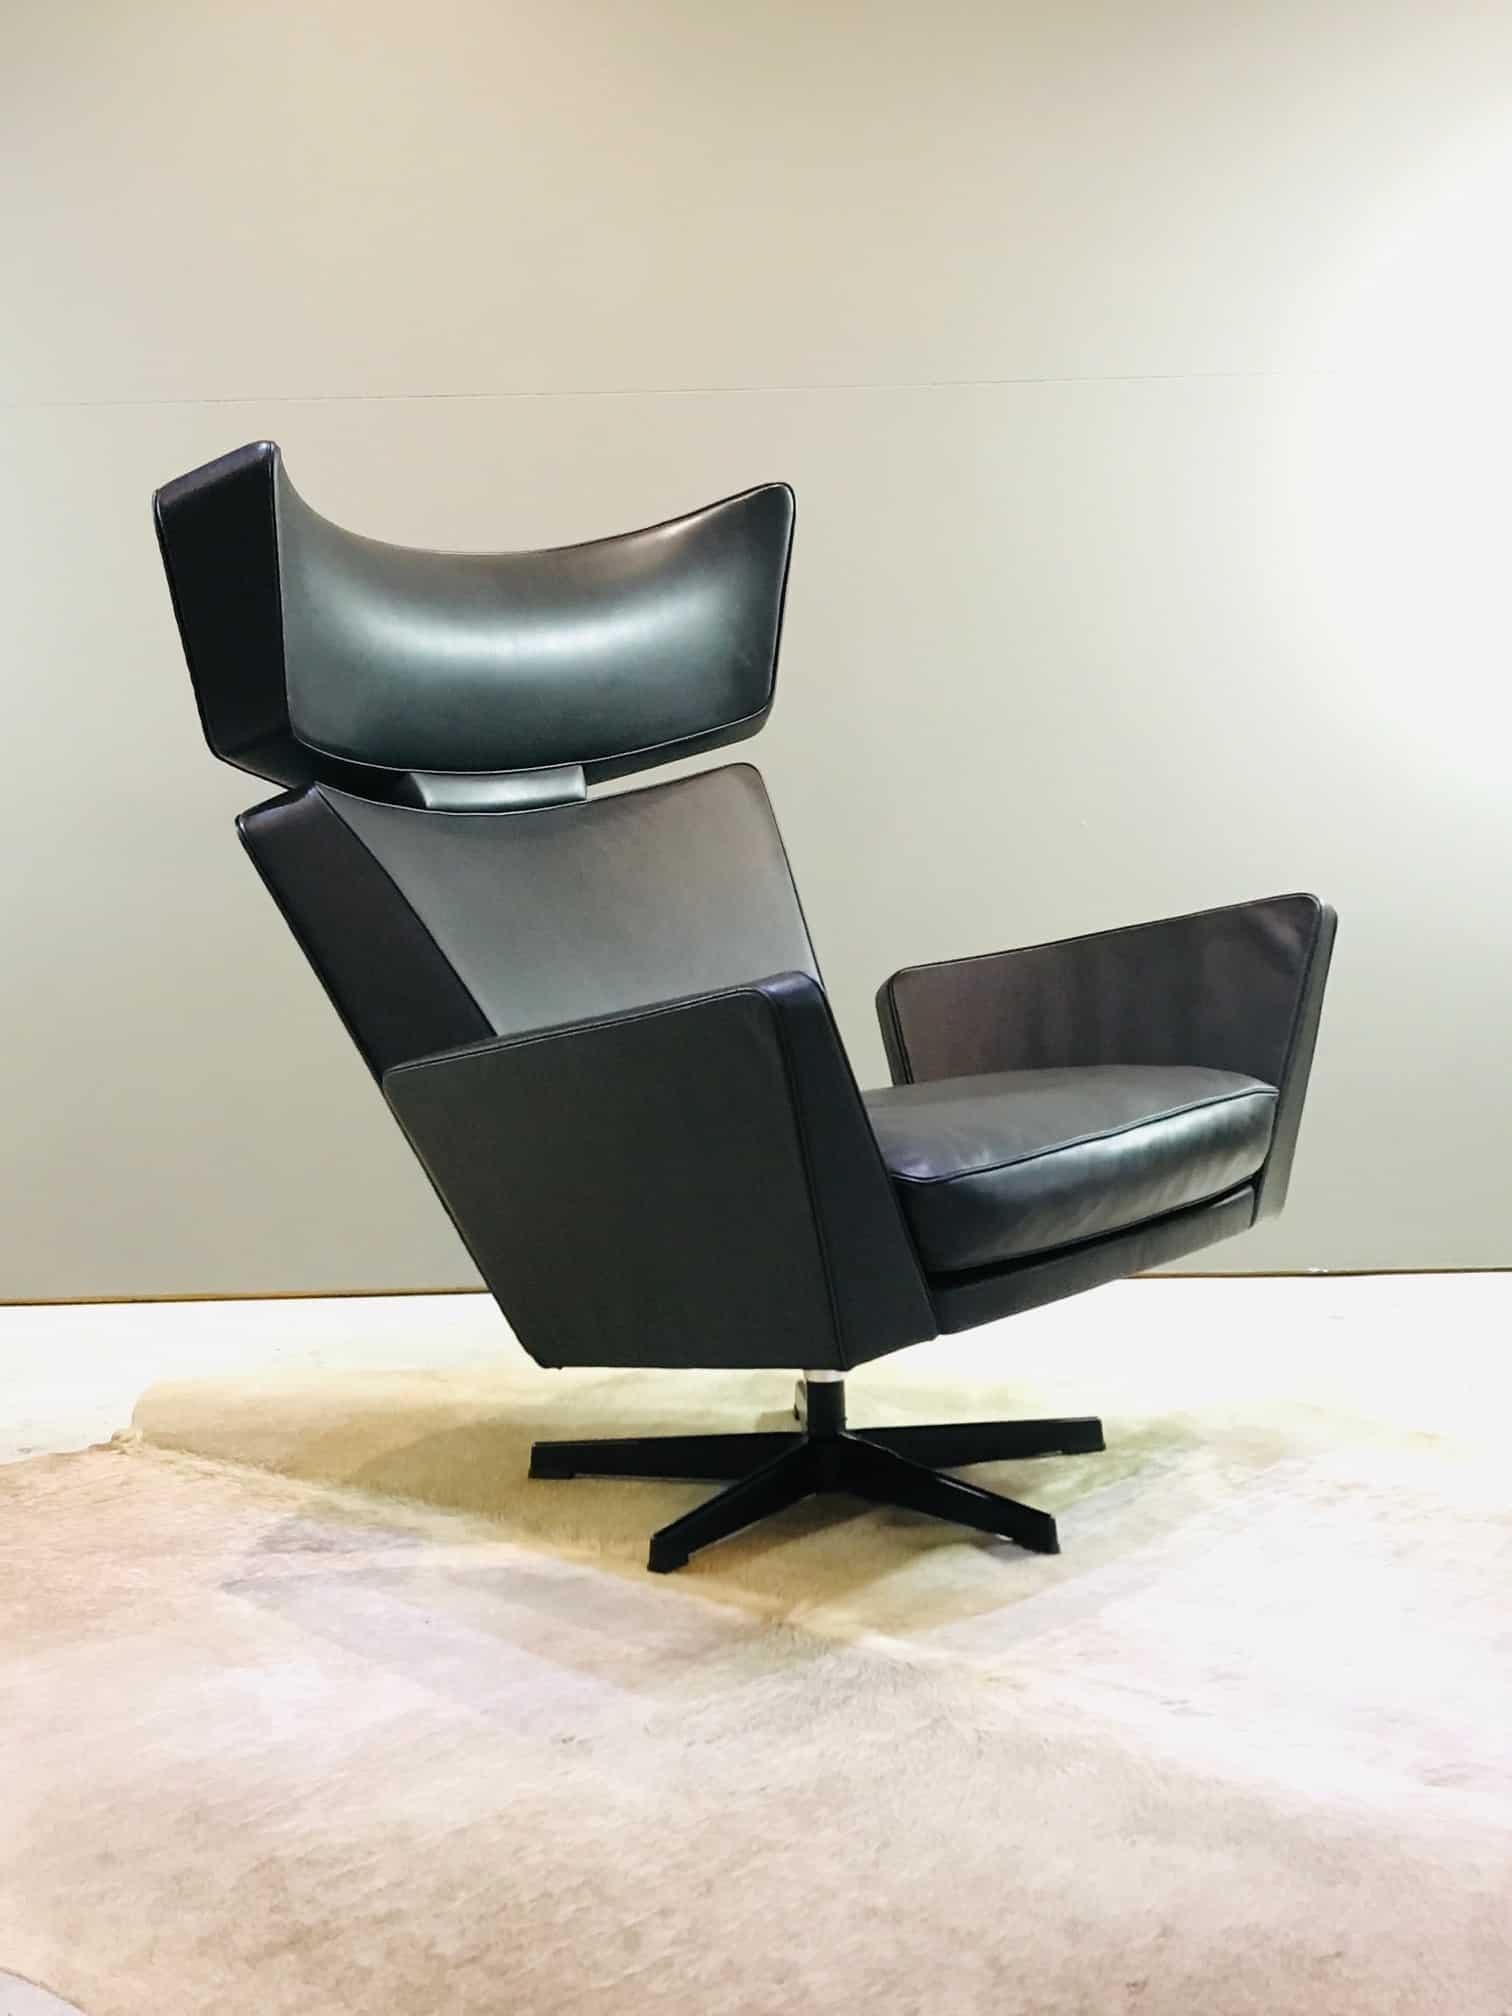 Mid-Century Modern Midcentury Black Leather Lounge Chair by Arne Jacobsen Oksen, Ox Chair For Sale